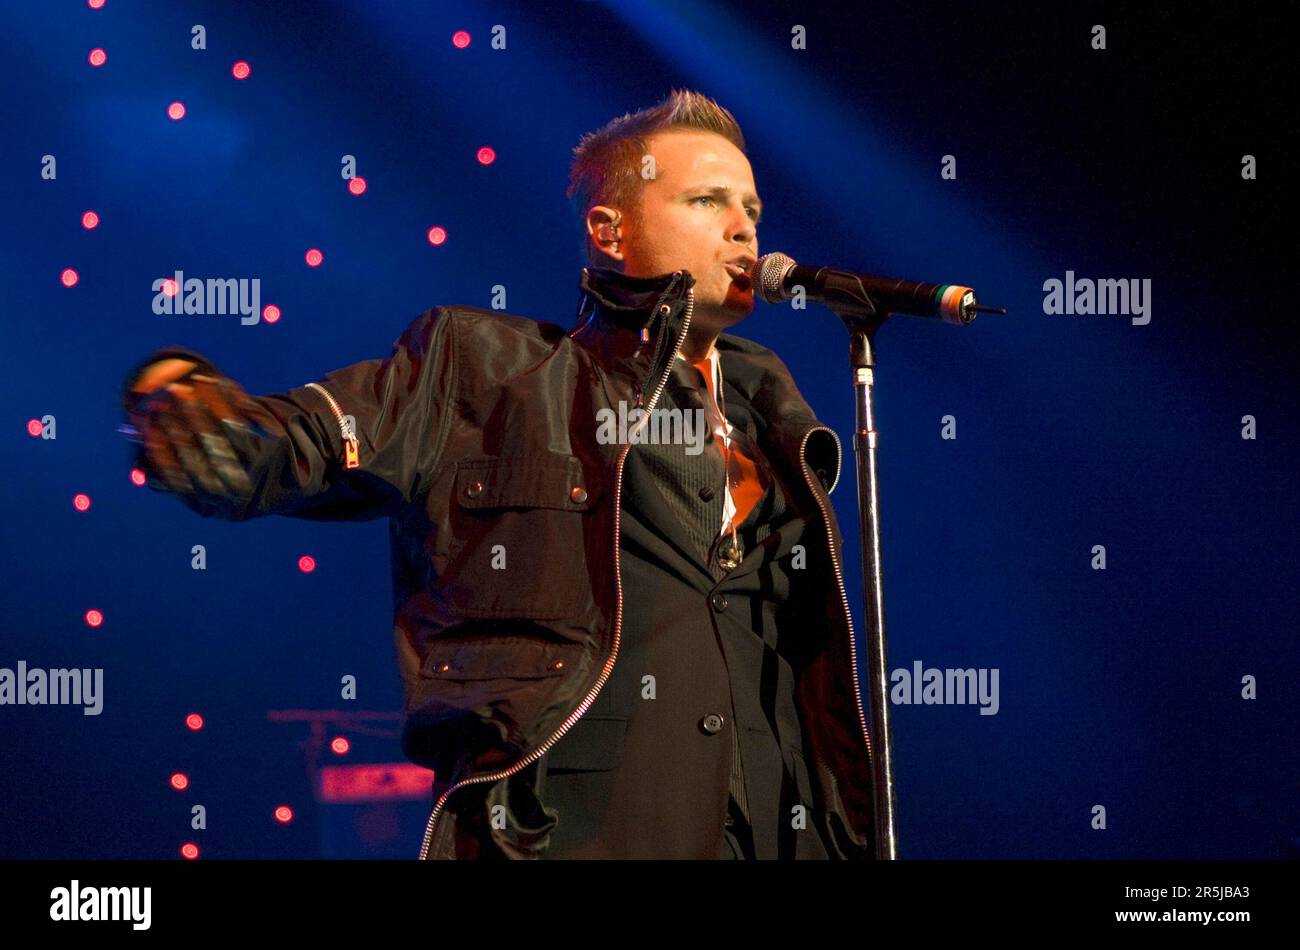 Nicky Byrne of Irish pop band, Westlife, performing on stage at the Westpac Arena, Christchurch, New Zealand, Wednesday, May 07, 2008. Stock Photo